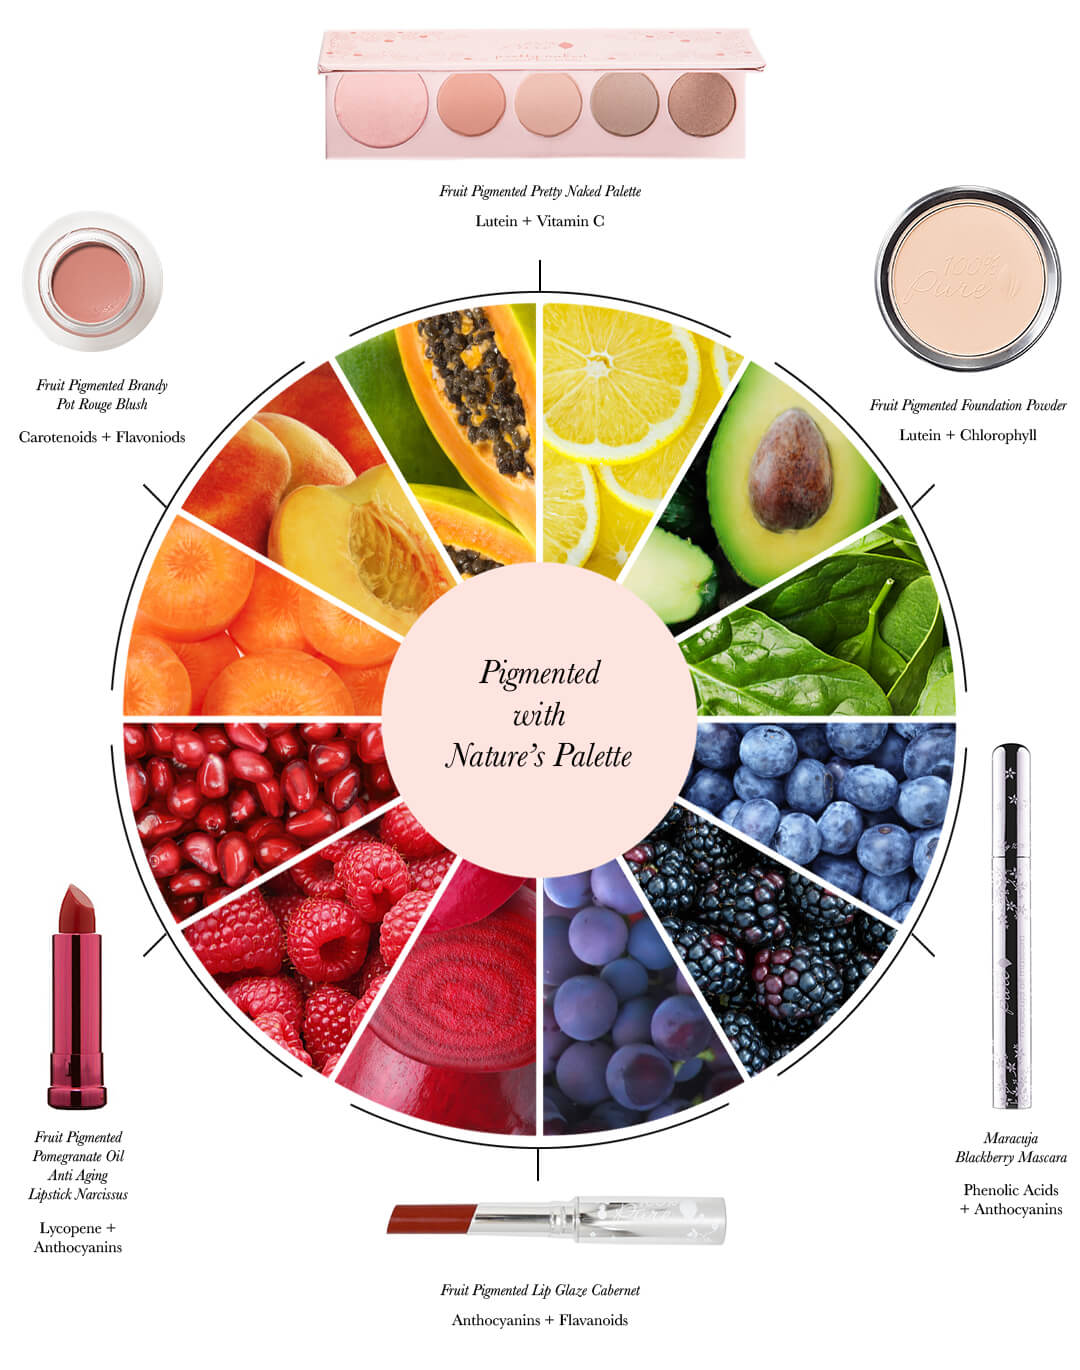 Pie chart of 100% PURE’s fruit pigmented products